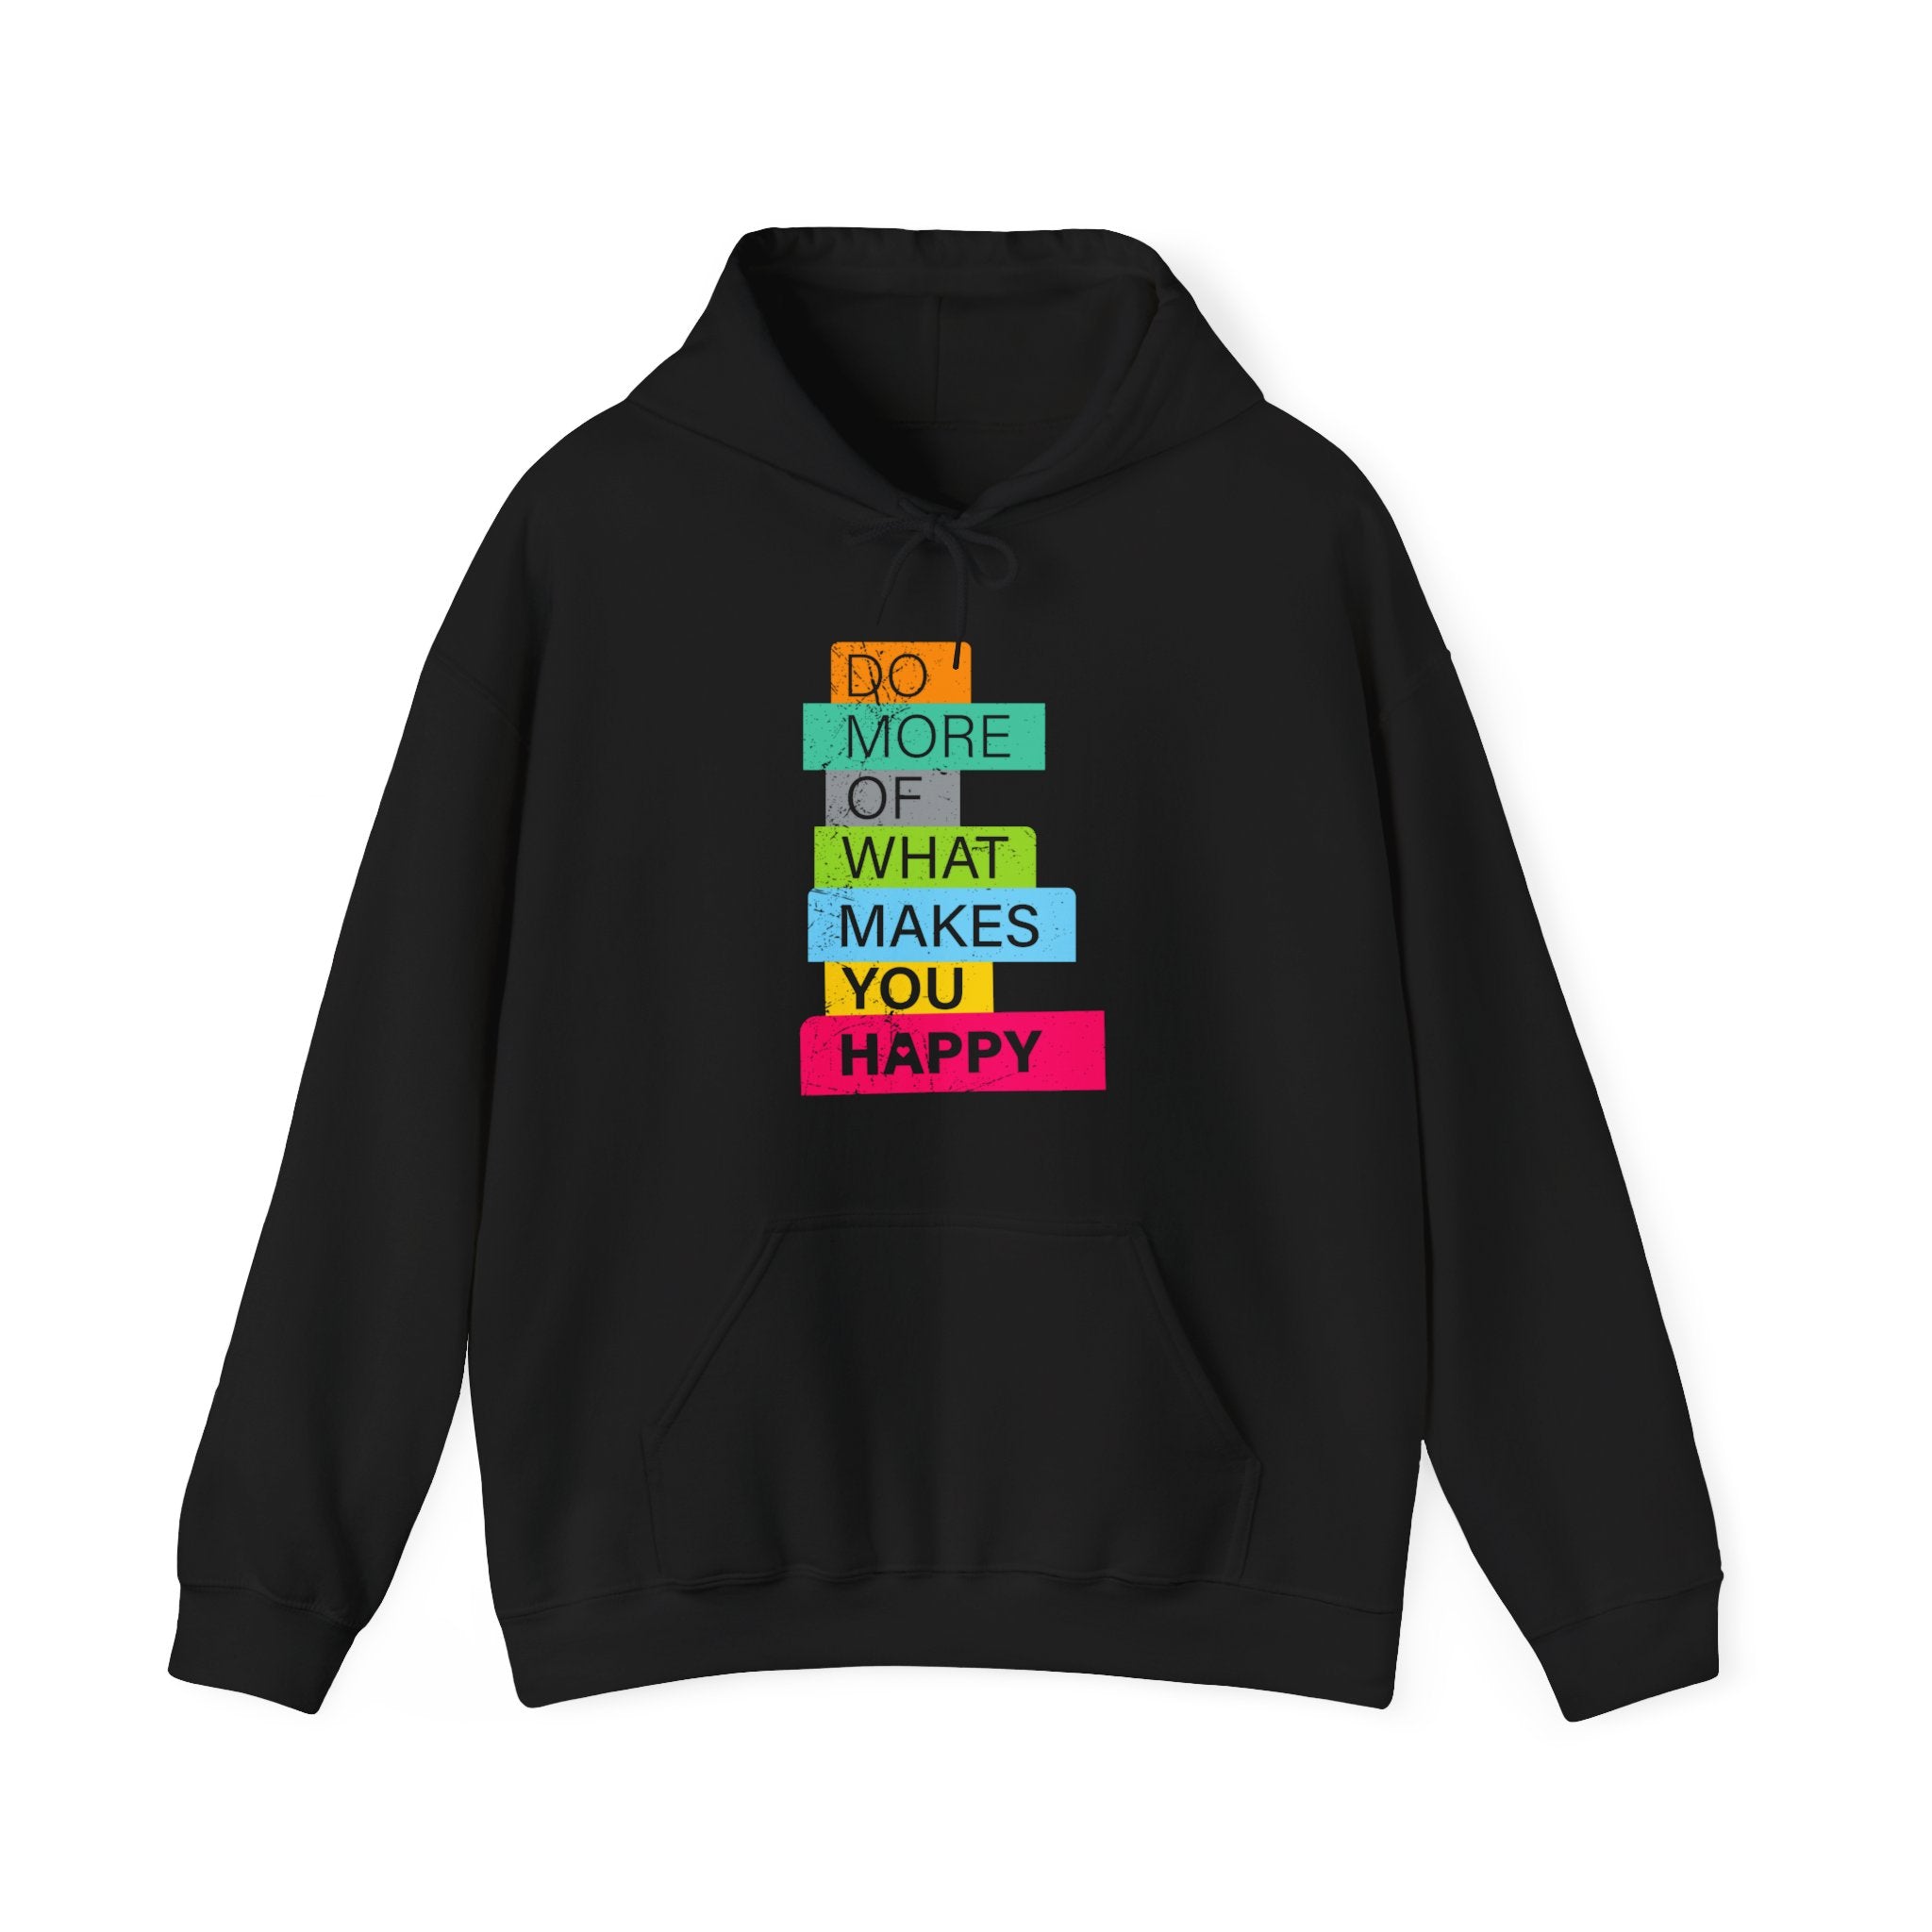 Do More of What Makes You Happy - Hooded Sweatshirt